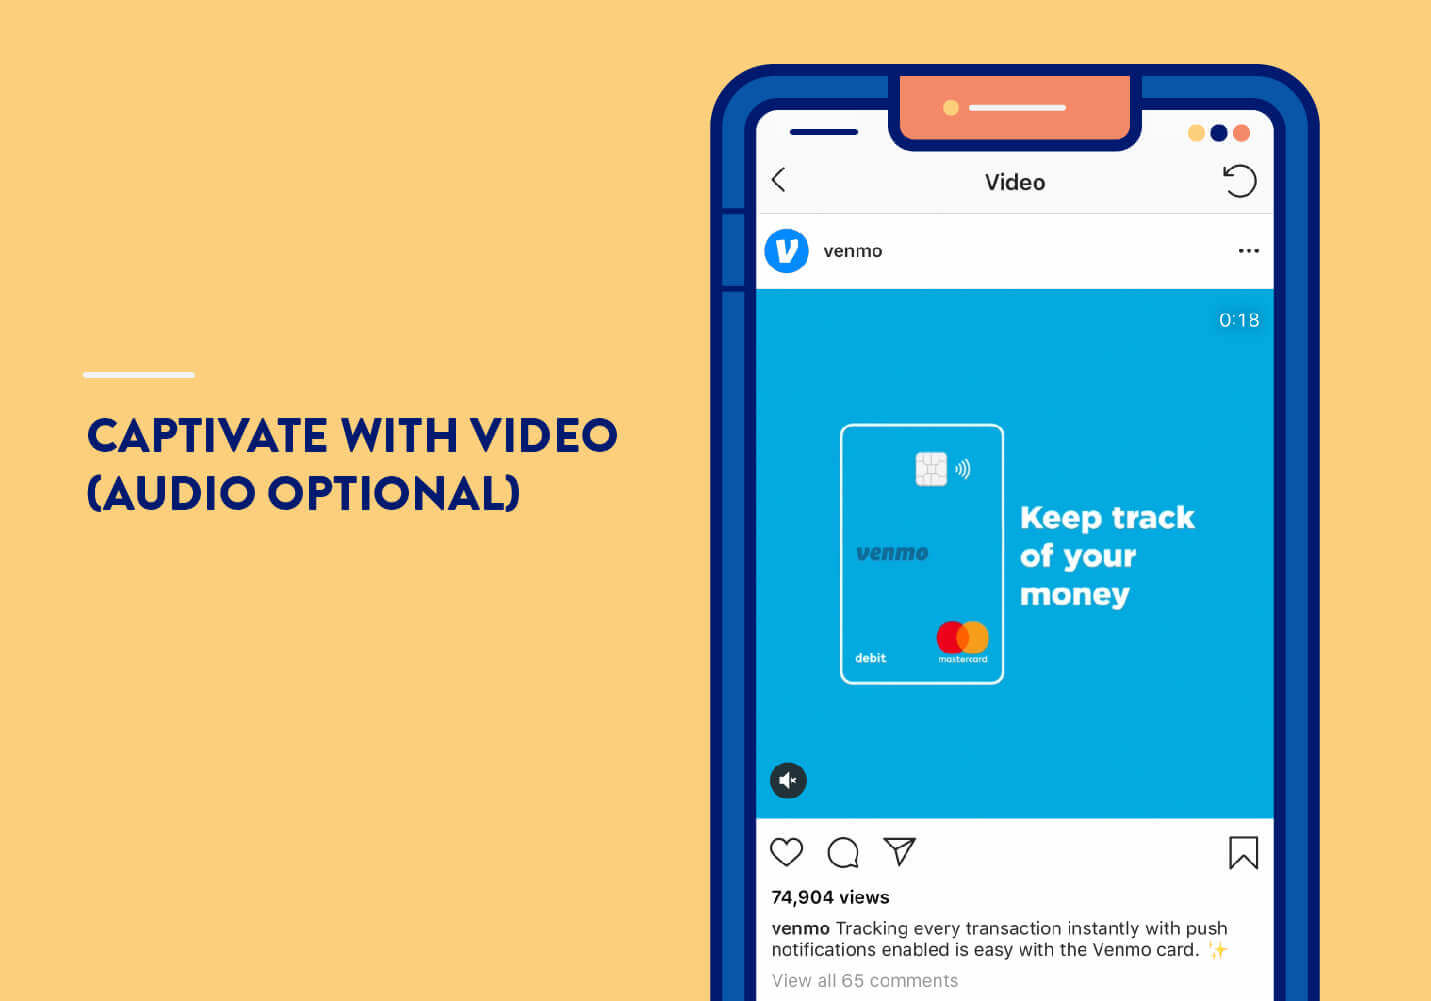 mobile app marketing strategies with example video from venmo on instagram without audio